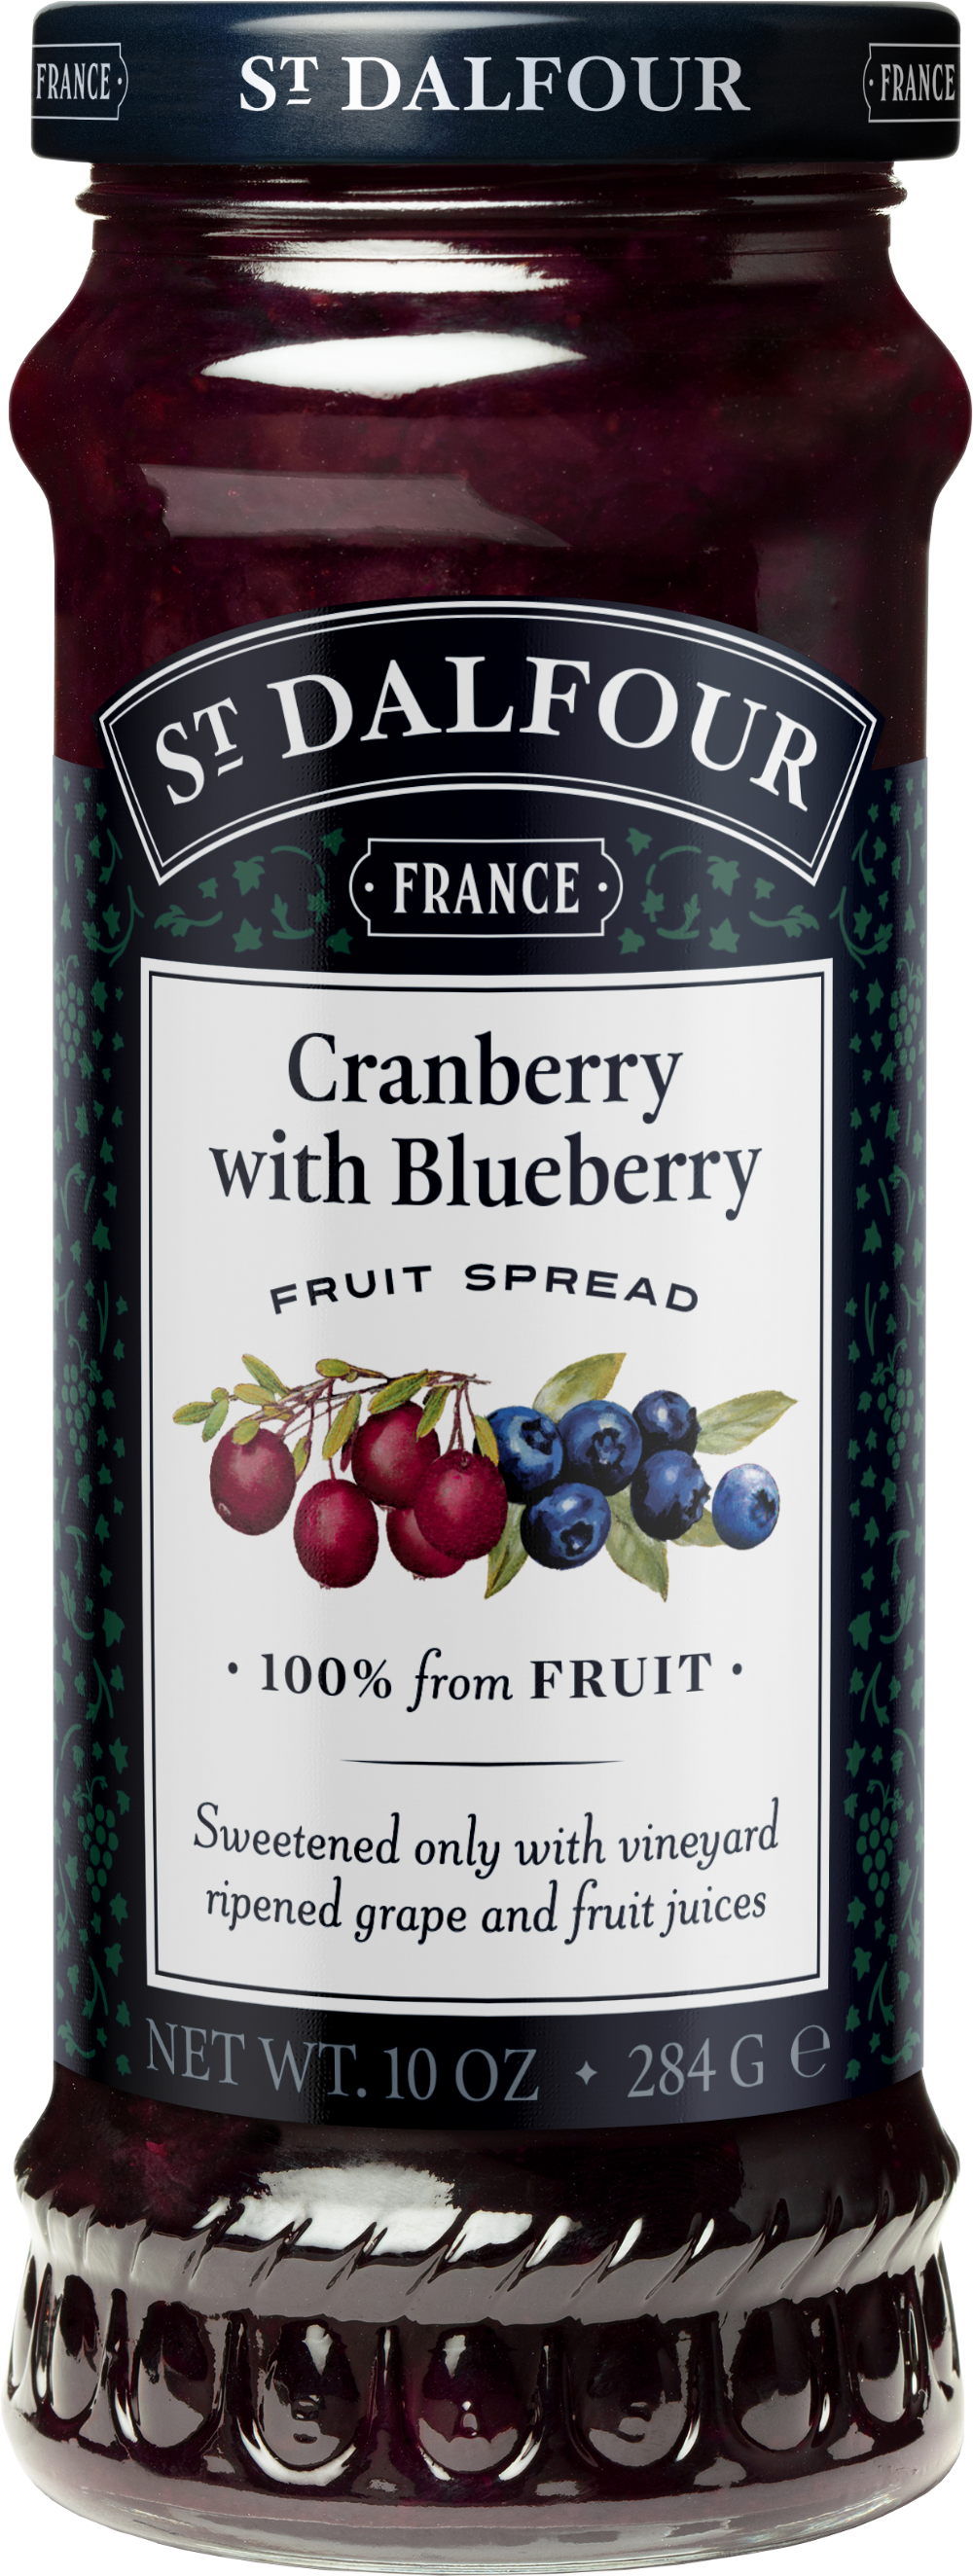 ST DALFOUR Cranberry with Blueberry Fruit Spread 284g